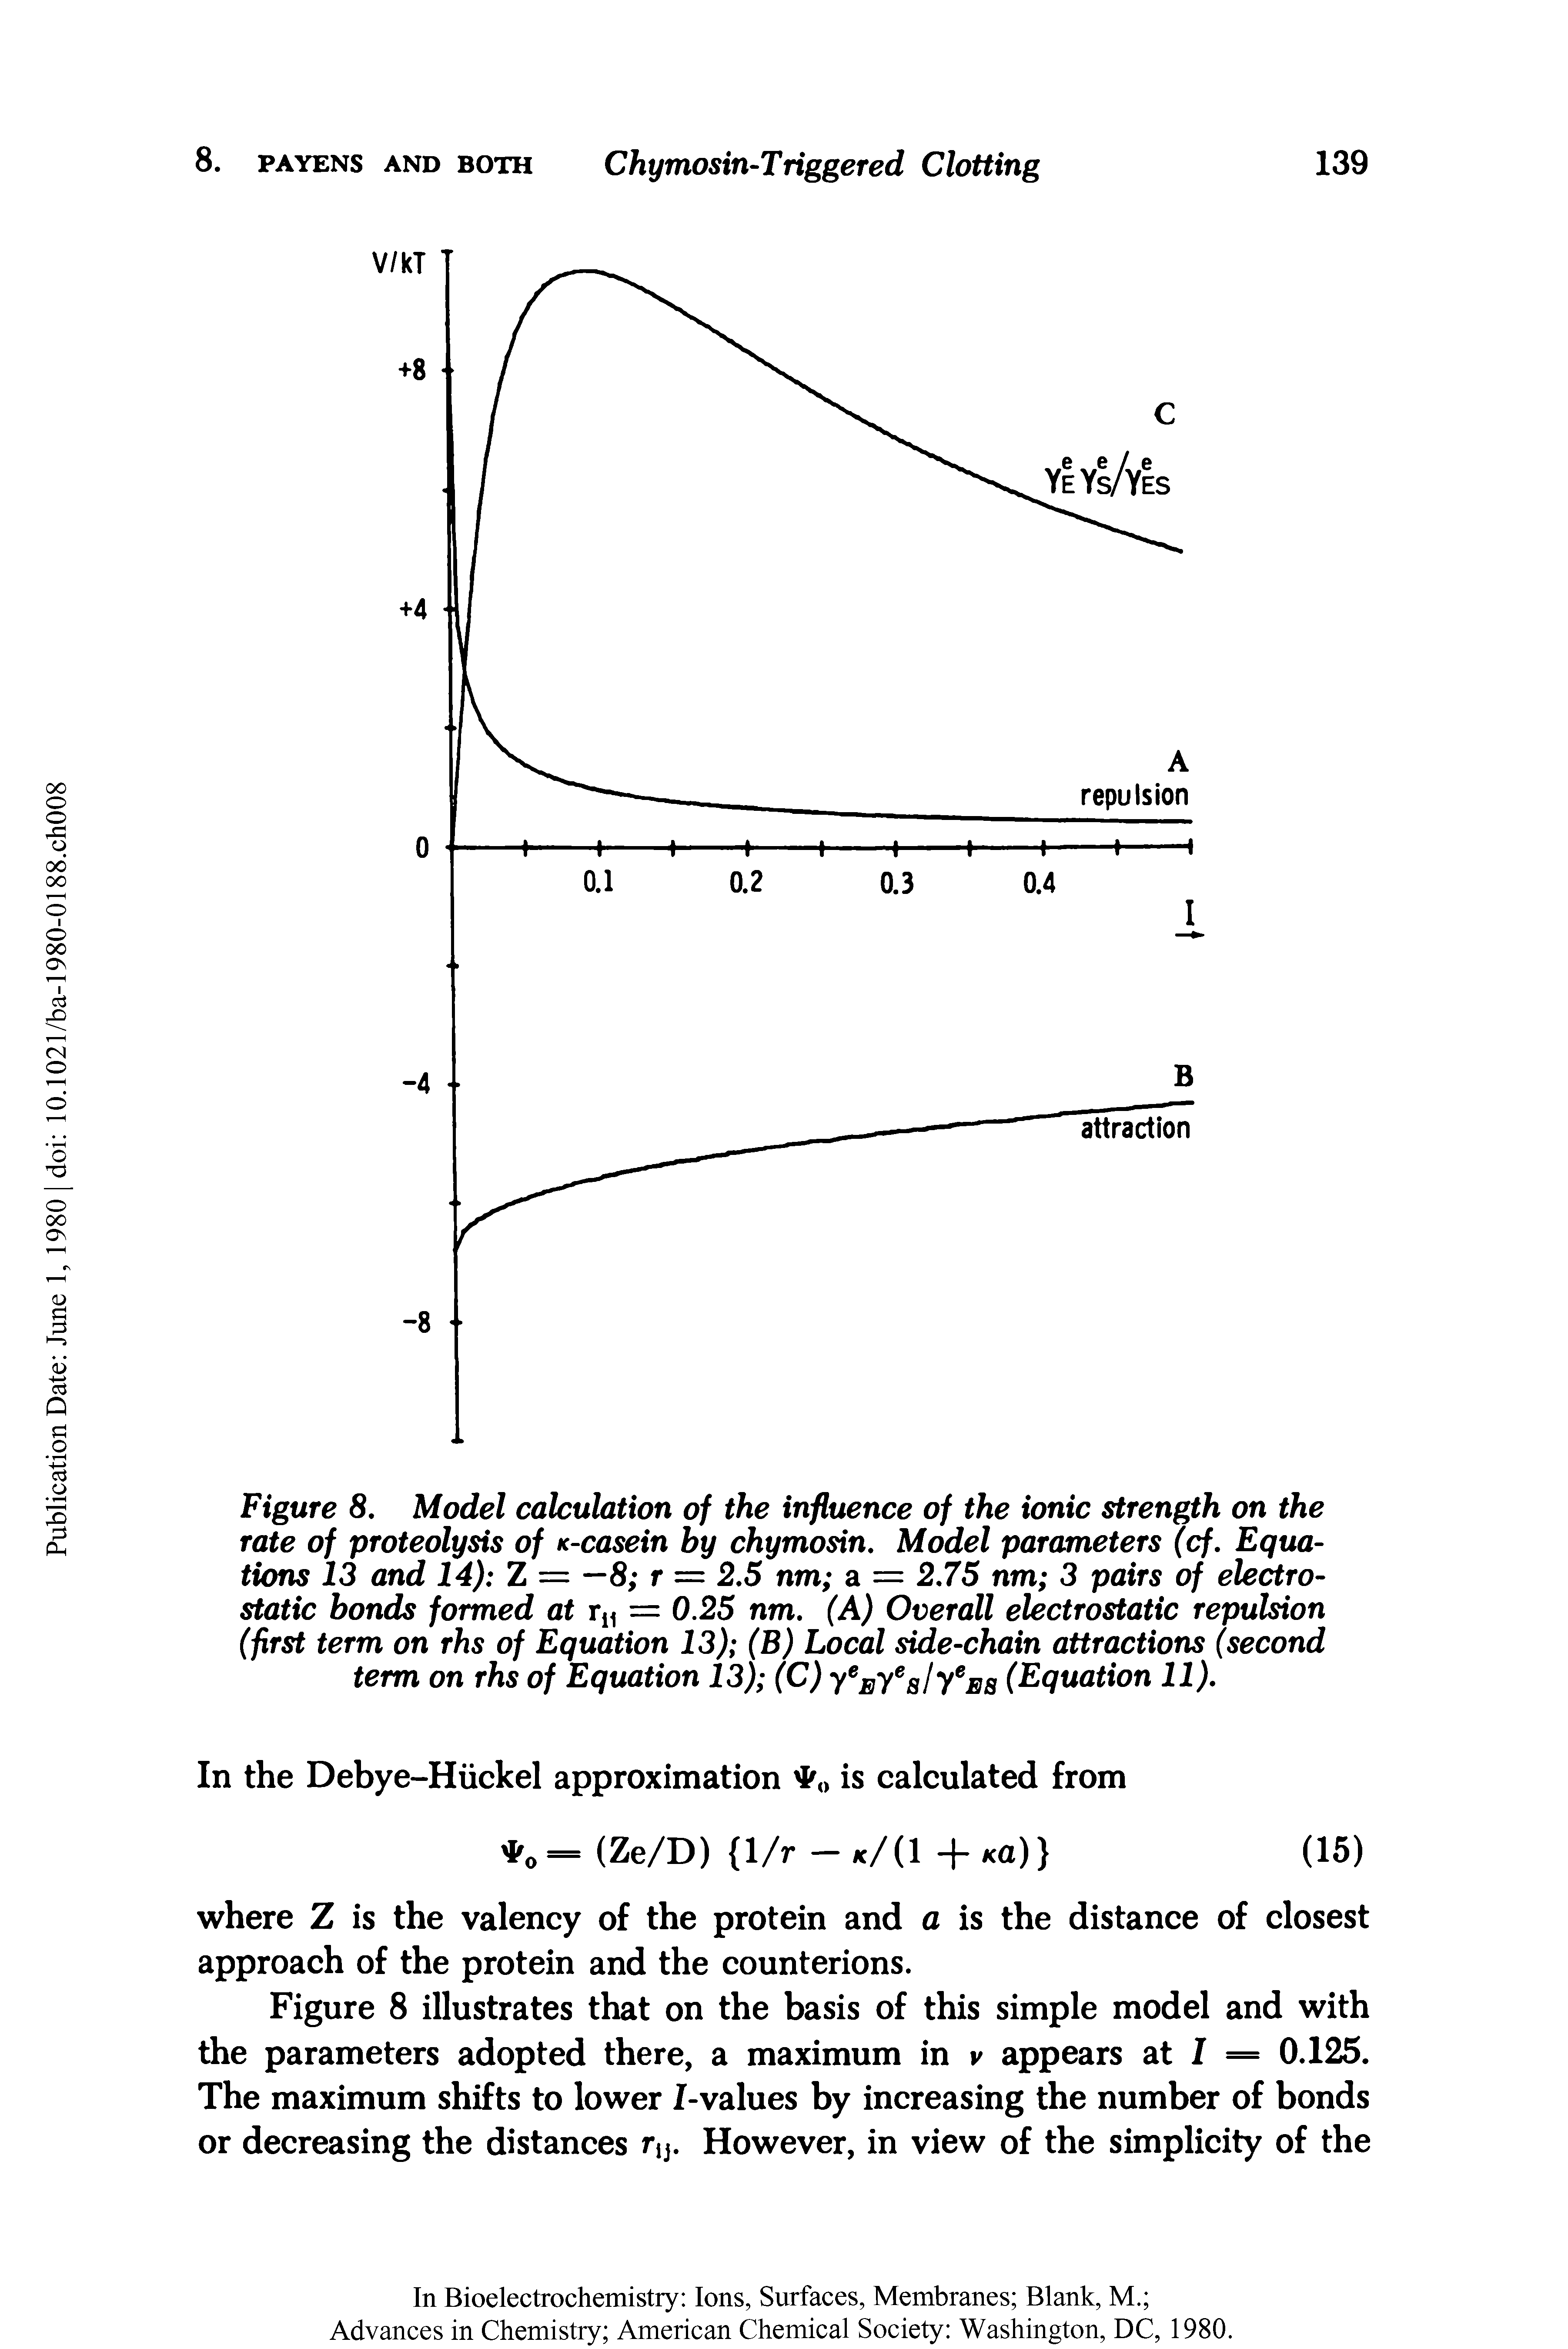 Figure 8. Model calculation of the influence of the ionic strength on the rate of proteolysis of K-casein by chymosin. Model parameters (cf. Equations 13 and 14) Z = —8 r = 2.5 nm a = 2.75 nm 3 pairs of electrostatic bonds formed at rt1 = 0.25 nm. (A) Overall electrostatic repulsion (first term on rhs of Equation 13) (B) Local side-chain attractions (second term on rhs of Equation 13) (C) yeByeslyeB8 (Equation 11).